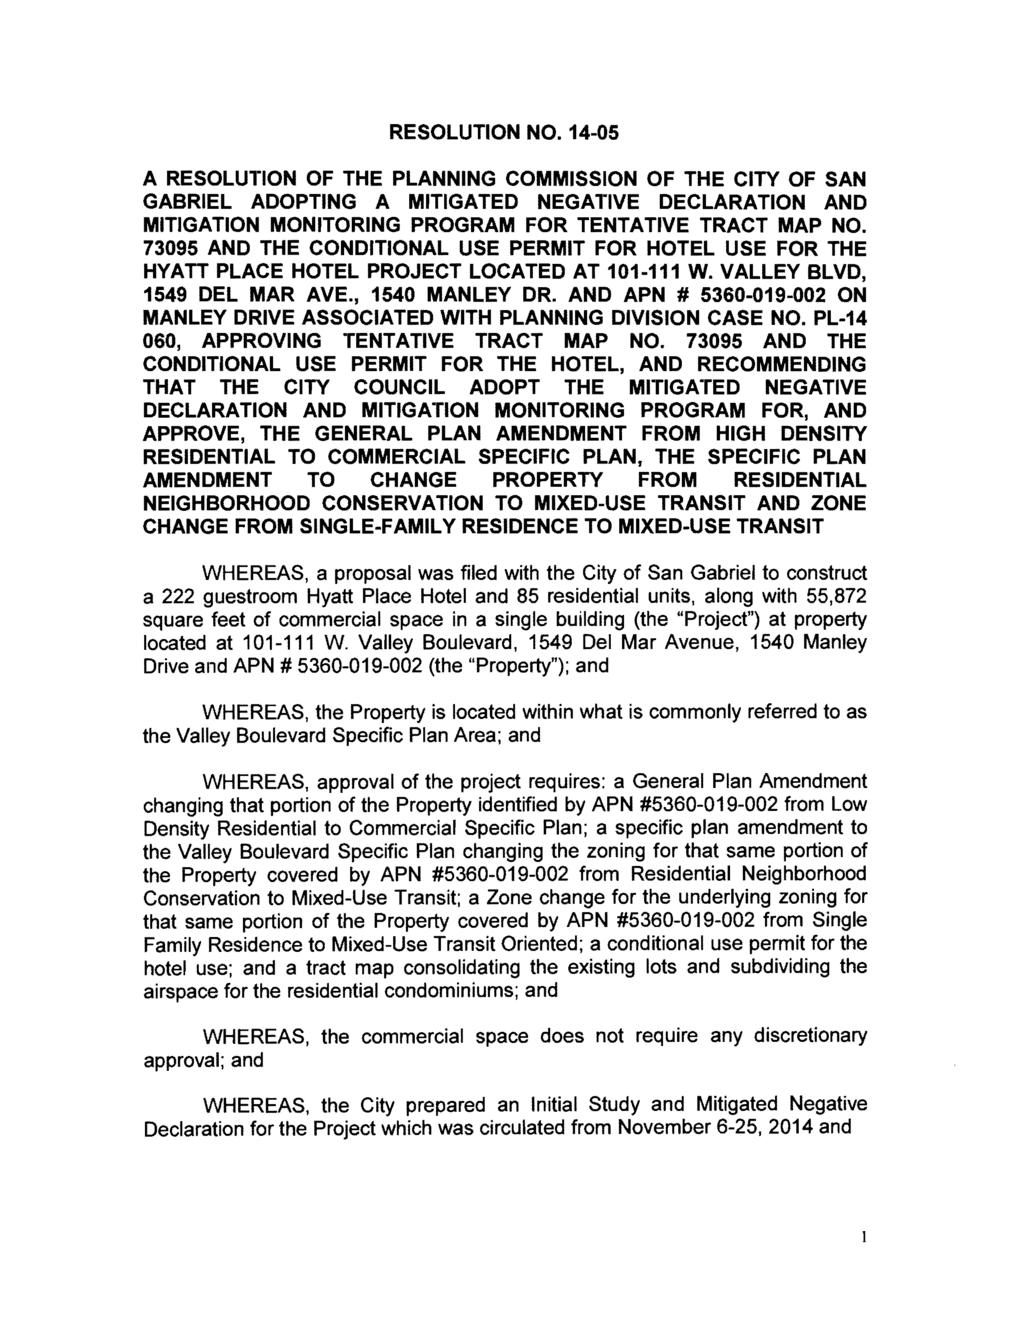 RESOLUTION NO. 14-05 A RESOLUTION OF THE PLANNING COMMISSION OF THE CITY OF SAN GABRIEL ADOPTING A MITIGATED NEGATIVE DECLARATION AND MITIGATION MONITORING PROGRAM FOR TENTATIVE TRACT MAP NO.